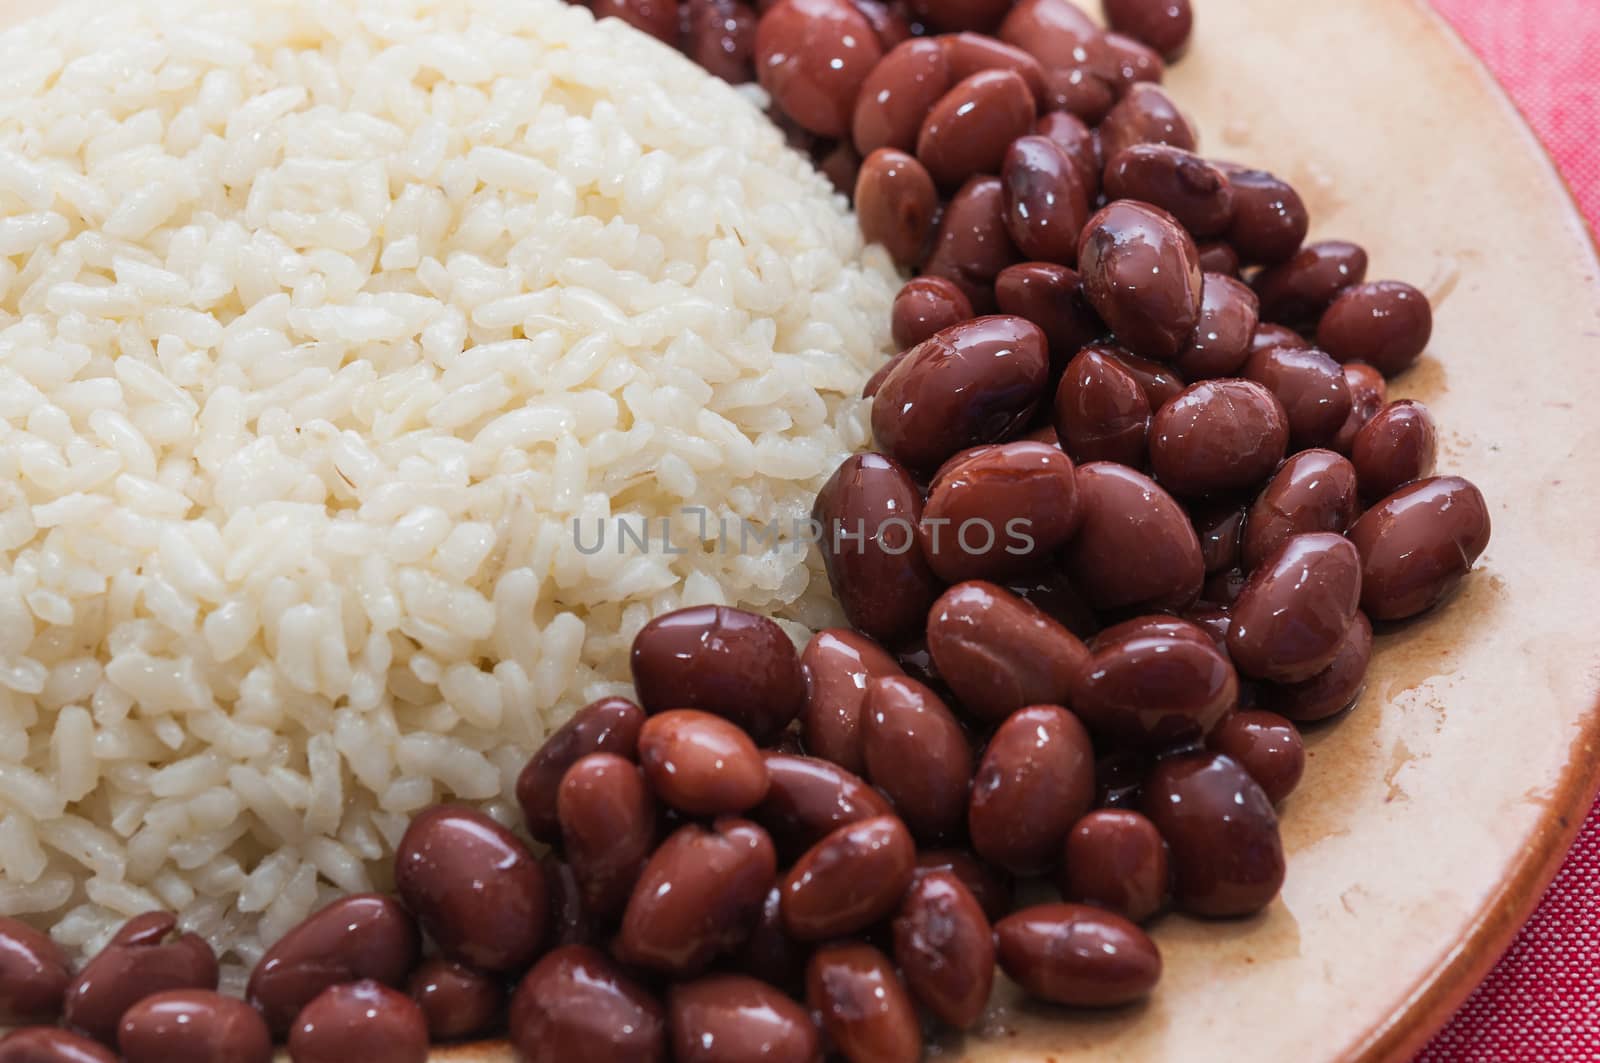 Rice dish with red beans by Mariamarmar